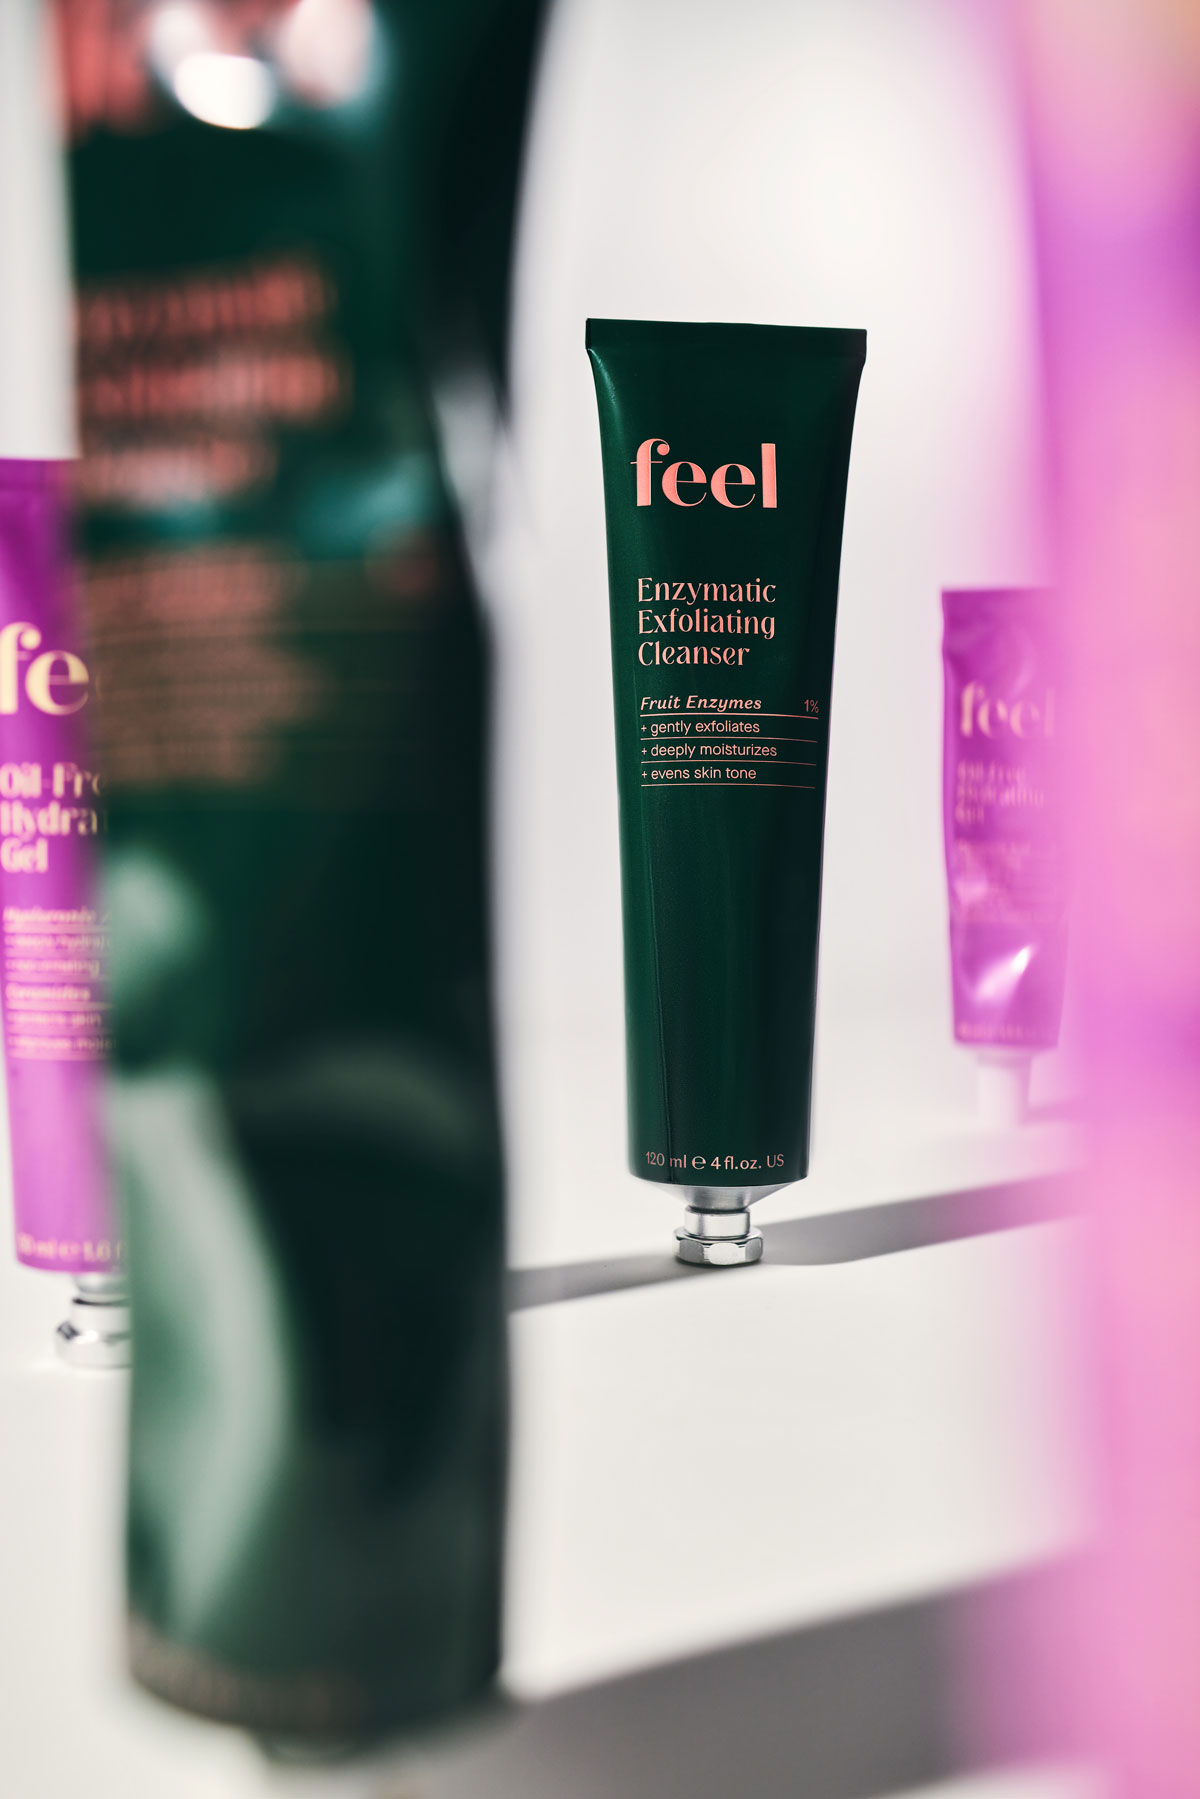 A dark green aluminum tube stands in the centre in focus and says "Enzymatic Exfoliating Cleanser" surrounded by tubes standing in the foreground and distance out of focus and blurred